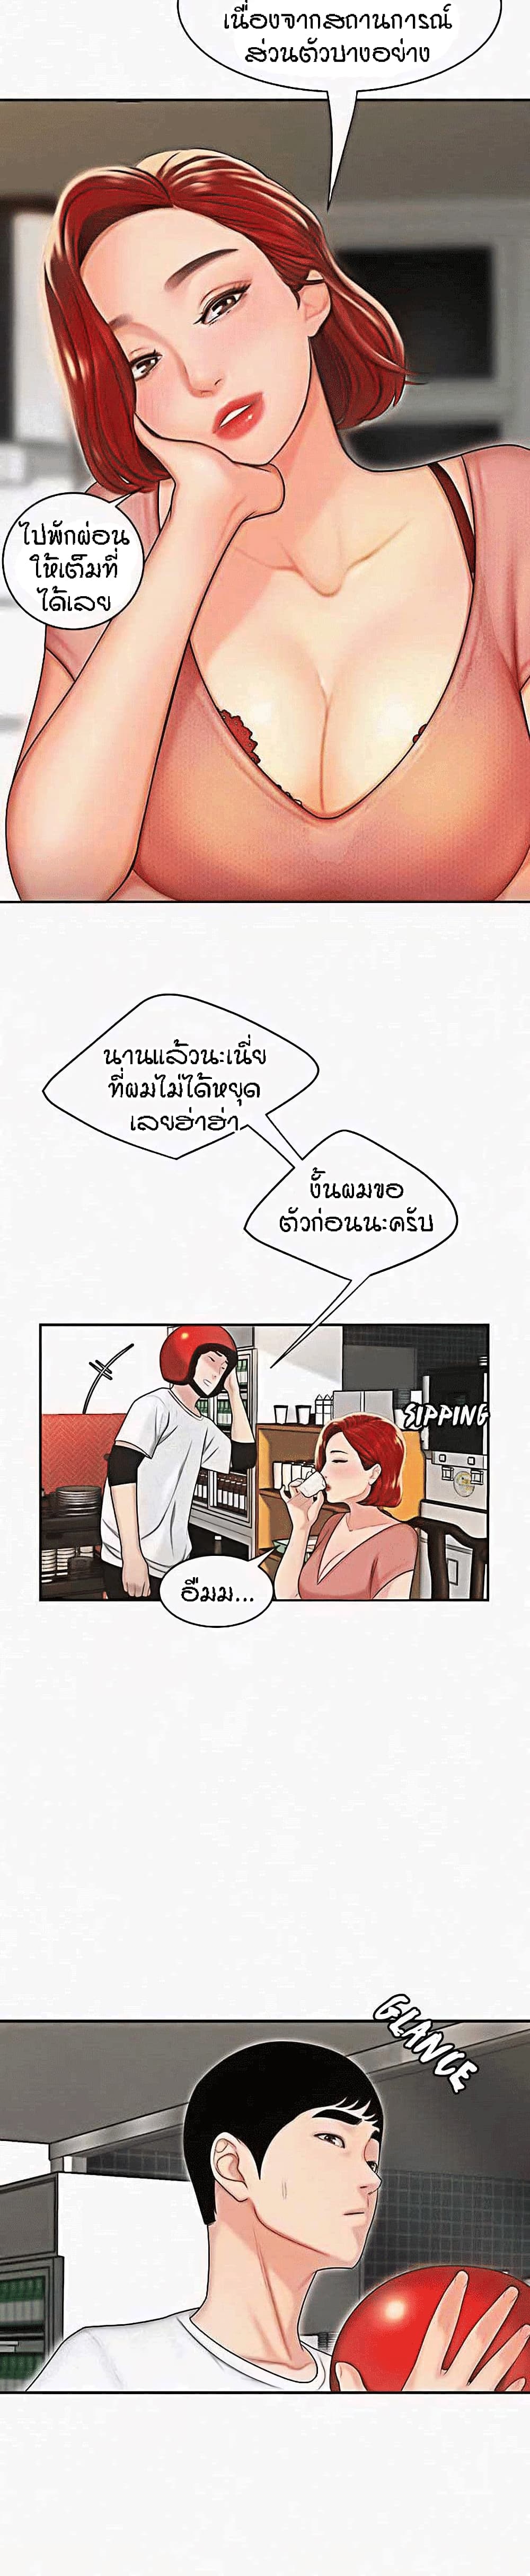 Delivery Man 1 (14)